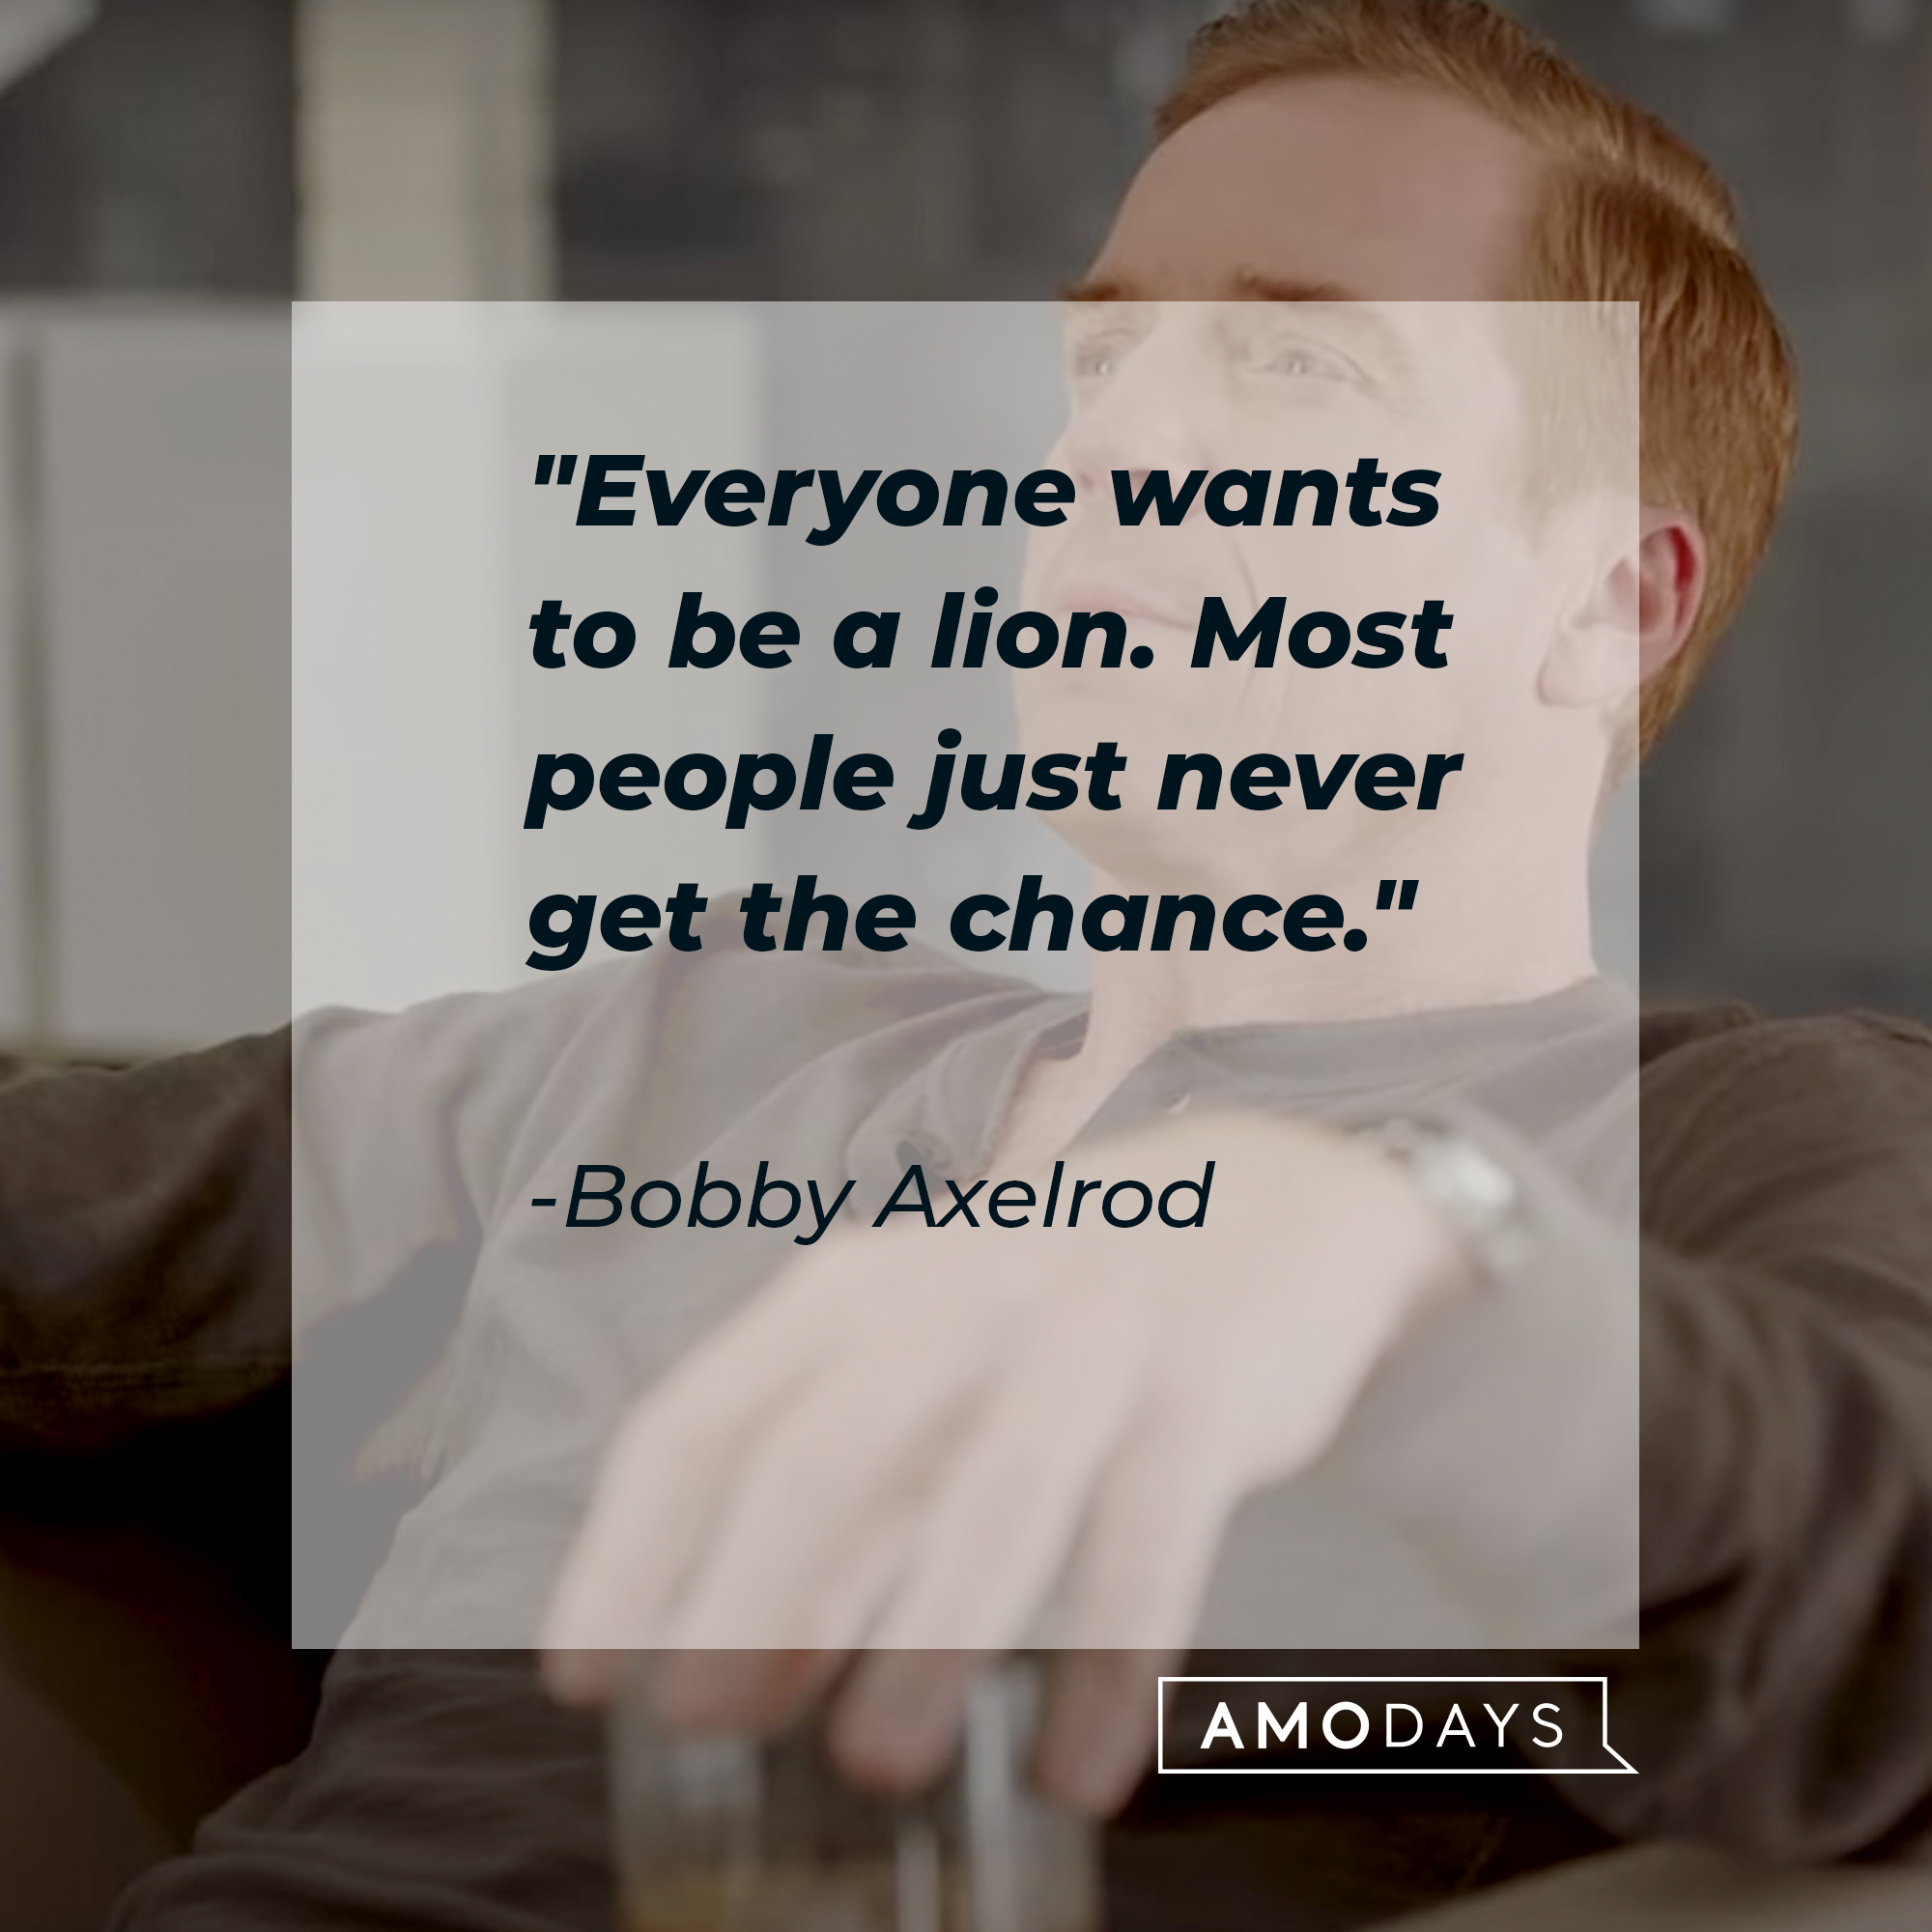 Bobby Axelrod's quote: "Everyone wants to be a lion. Most people just never get the chance." | Source: Youtube.com/BillionsOnShowtime